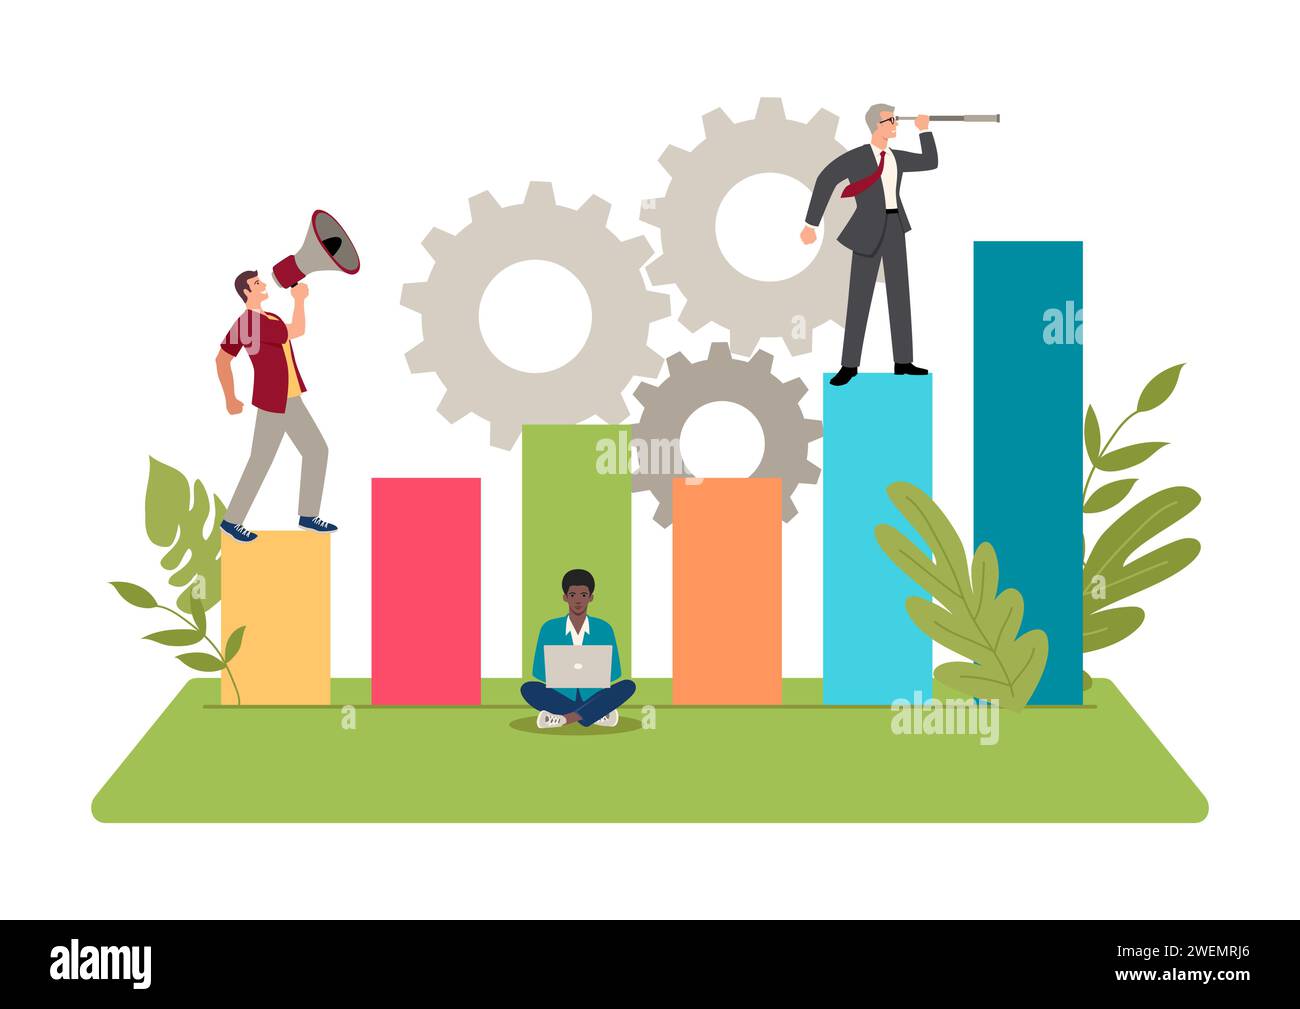 Simple flat vector illustration of casual business people carry out activities to improve performance Stock Vector